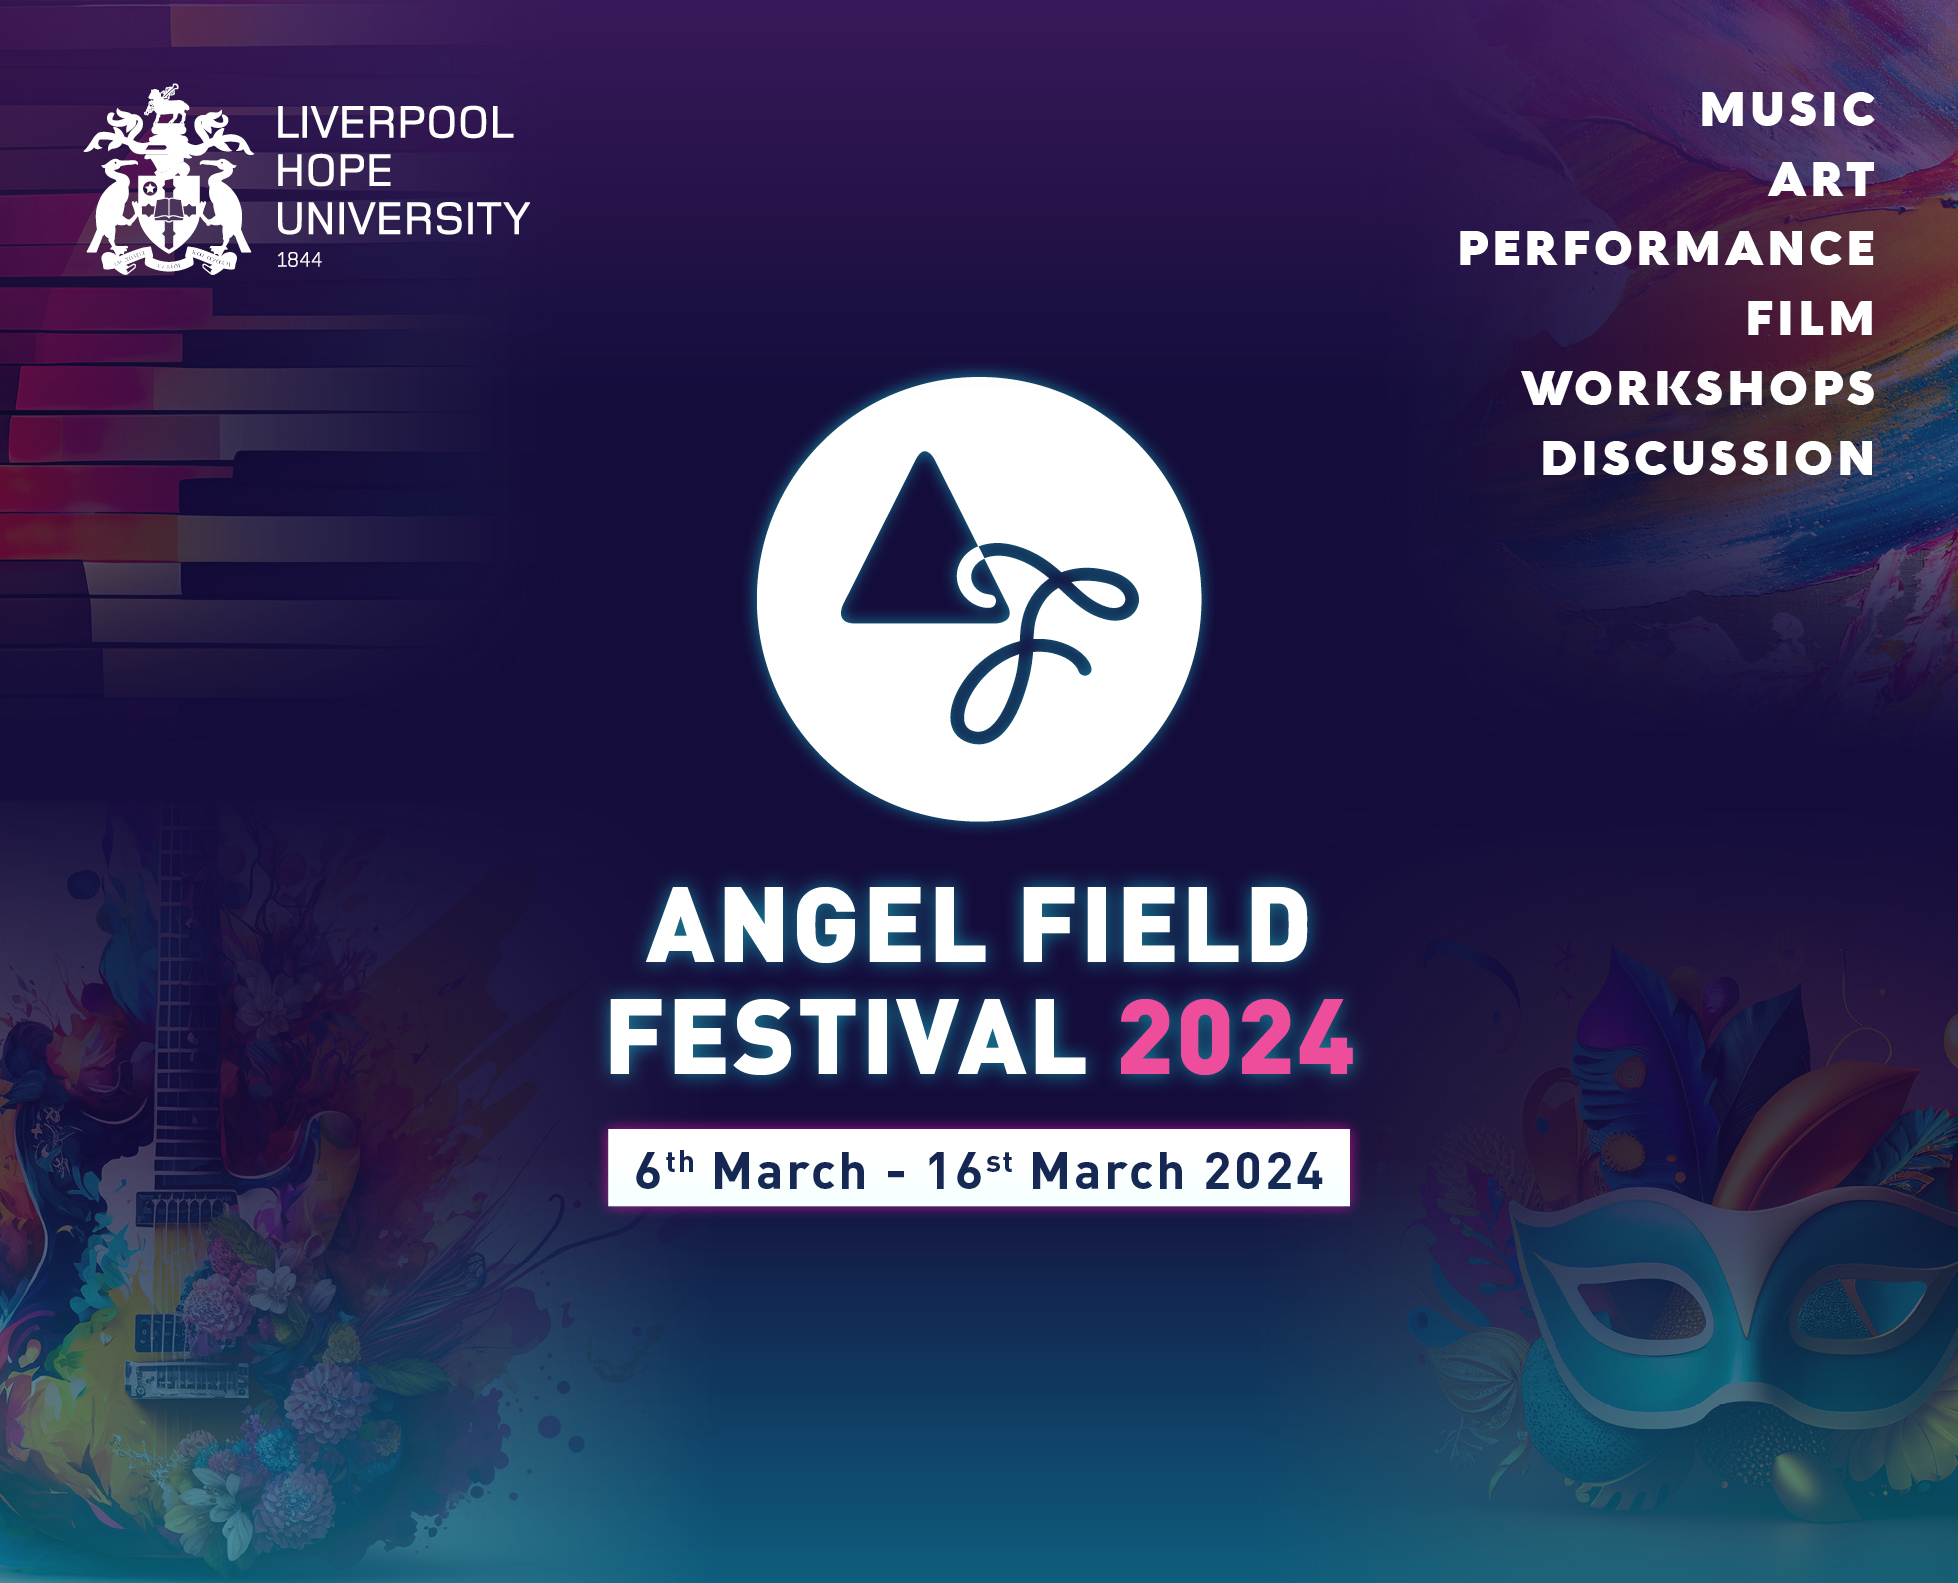 A purple graphic with the Angel Field Festival words and logo in the centre.